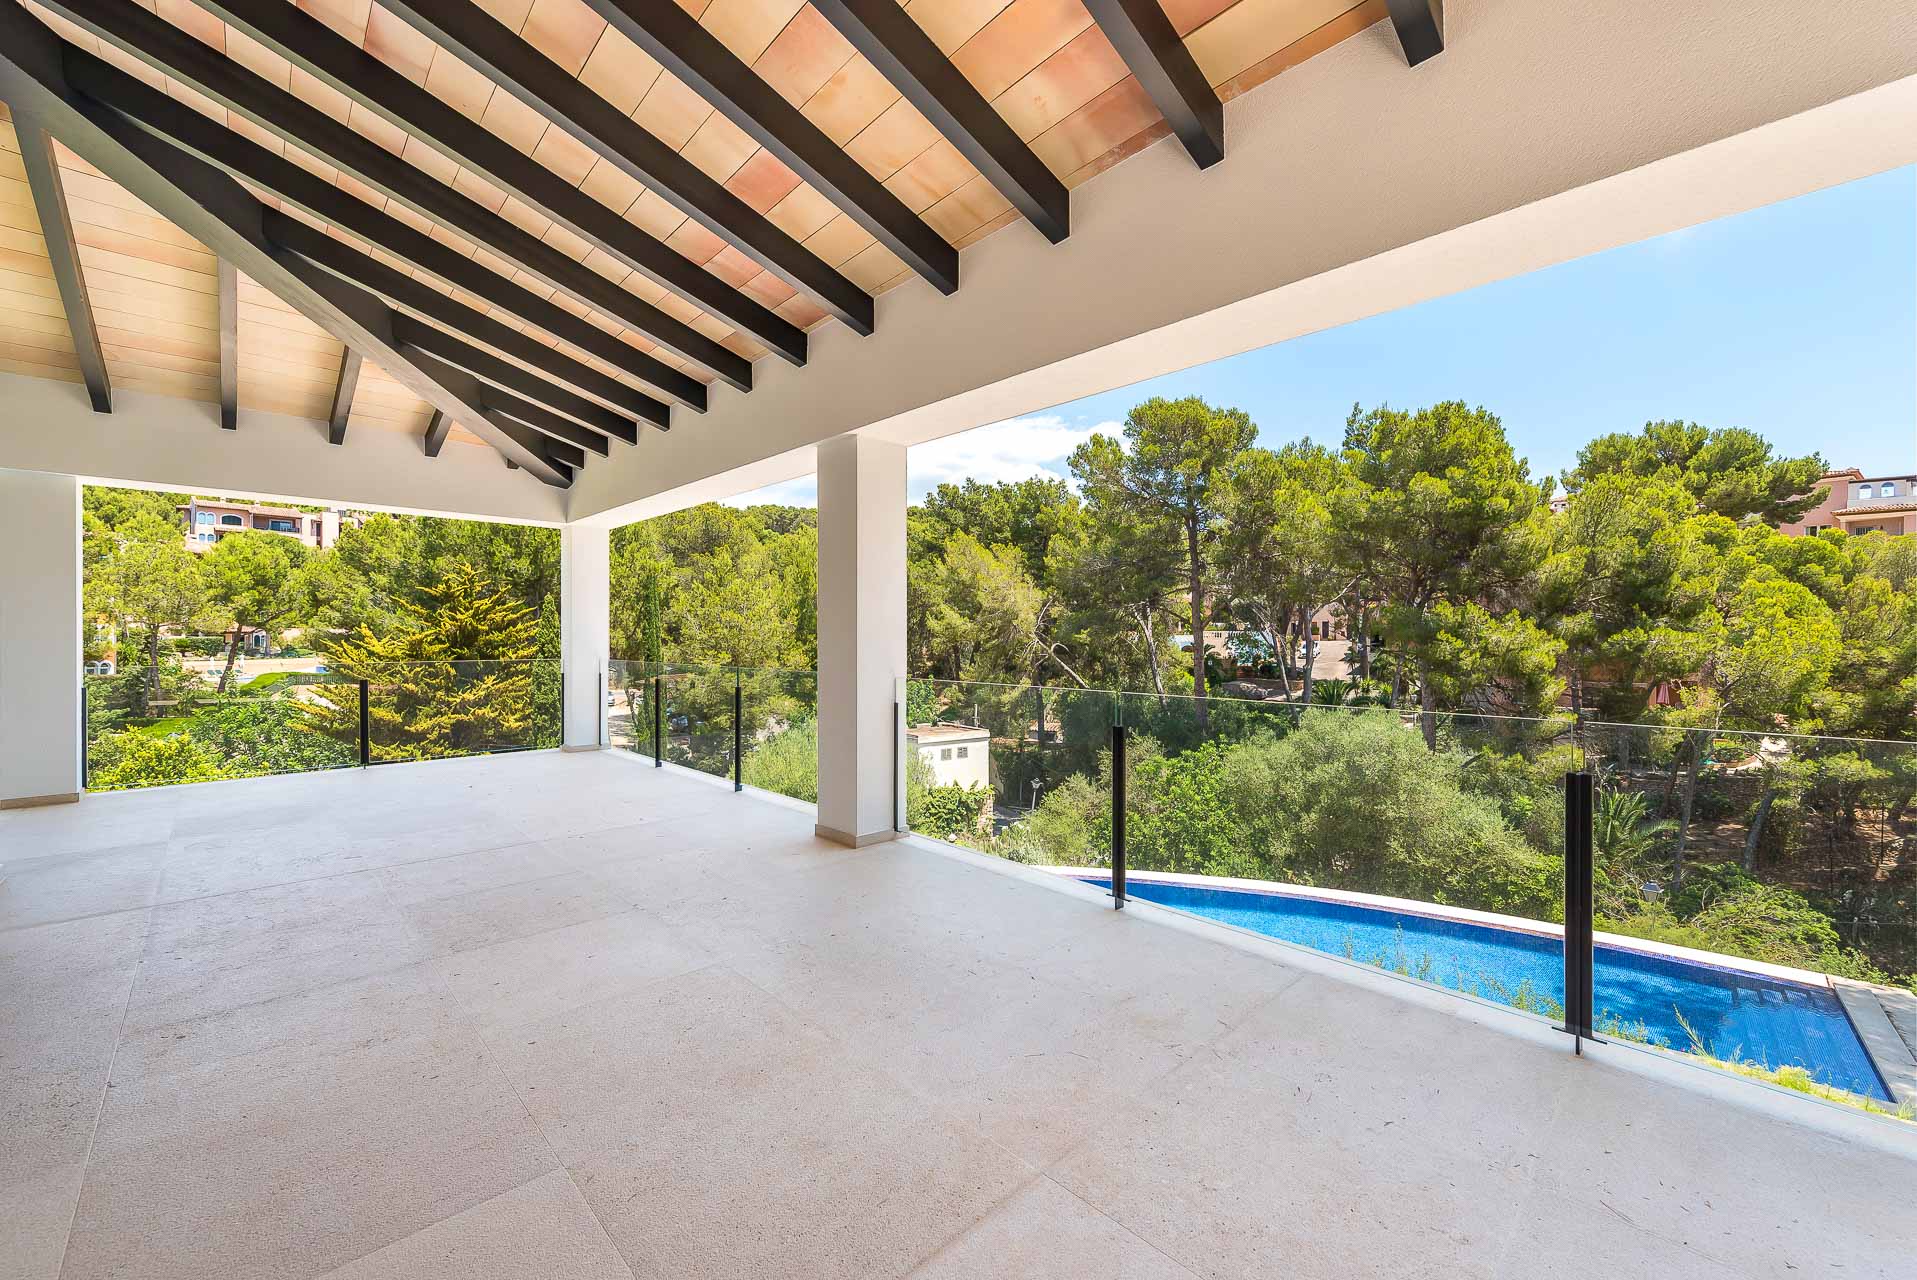 Exclusive completely renovated villa in second sea line in Cala Fornells - Covered terrace on the 1st floor